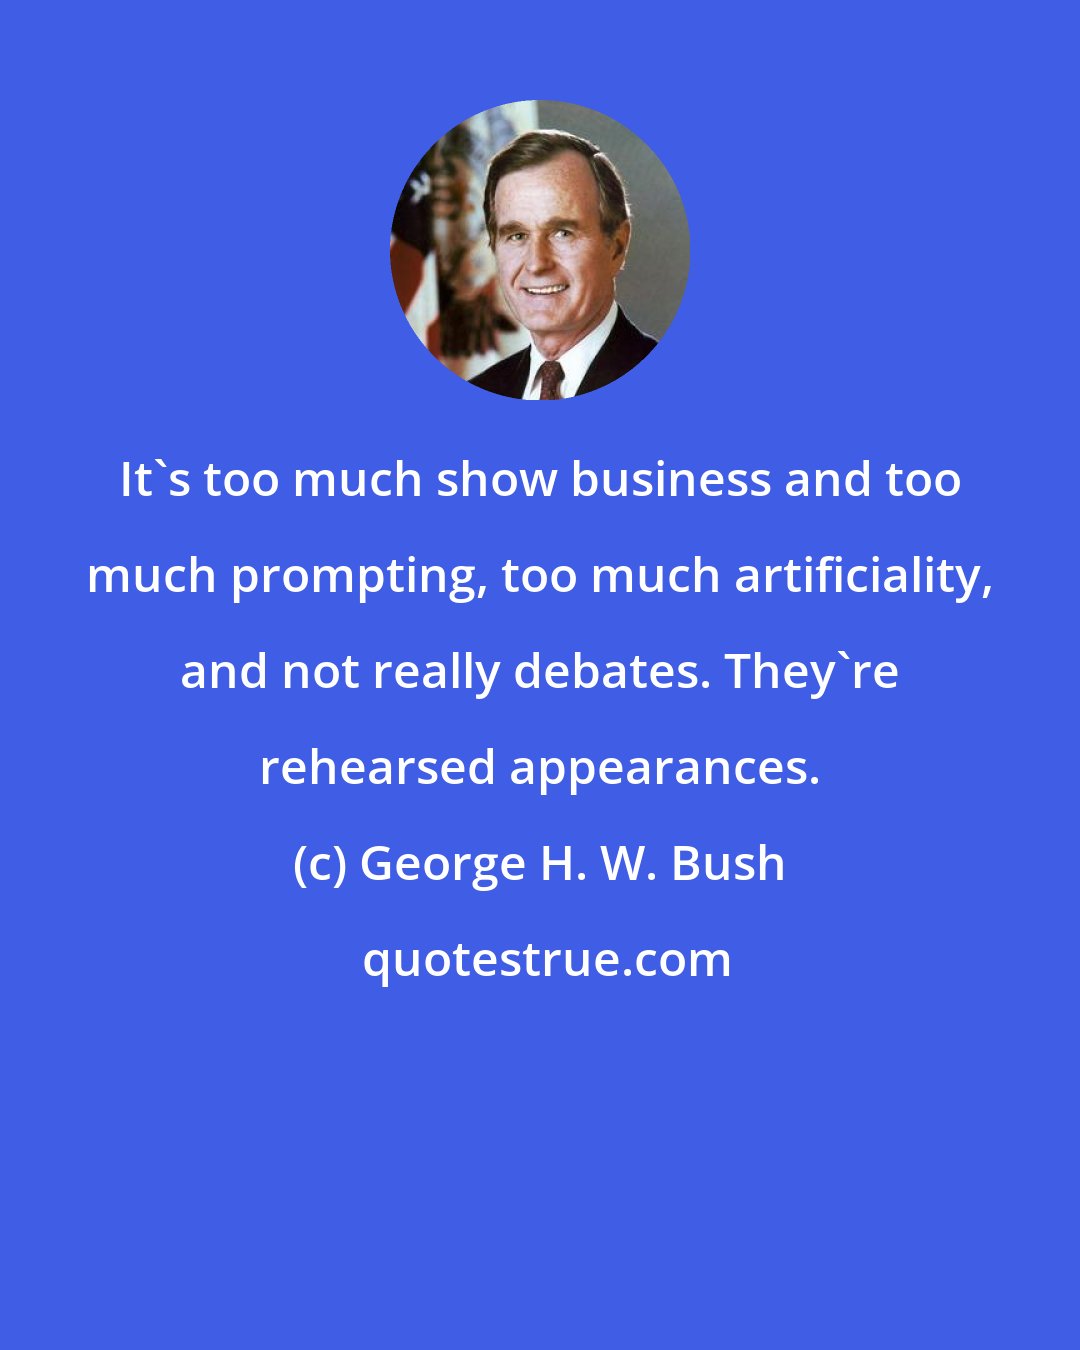 George H. W. Bush: It's too much show business and too much prompting, too much artificiality, and not really debates. They're rehearsed appearances.